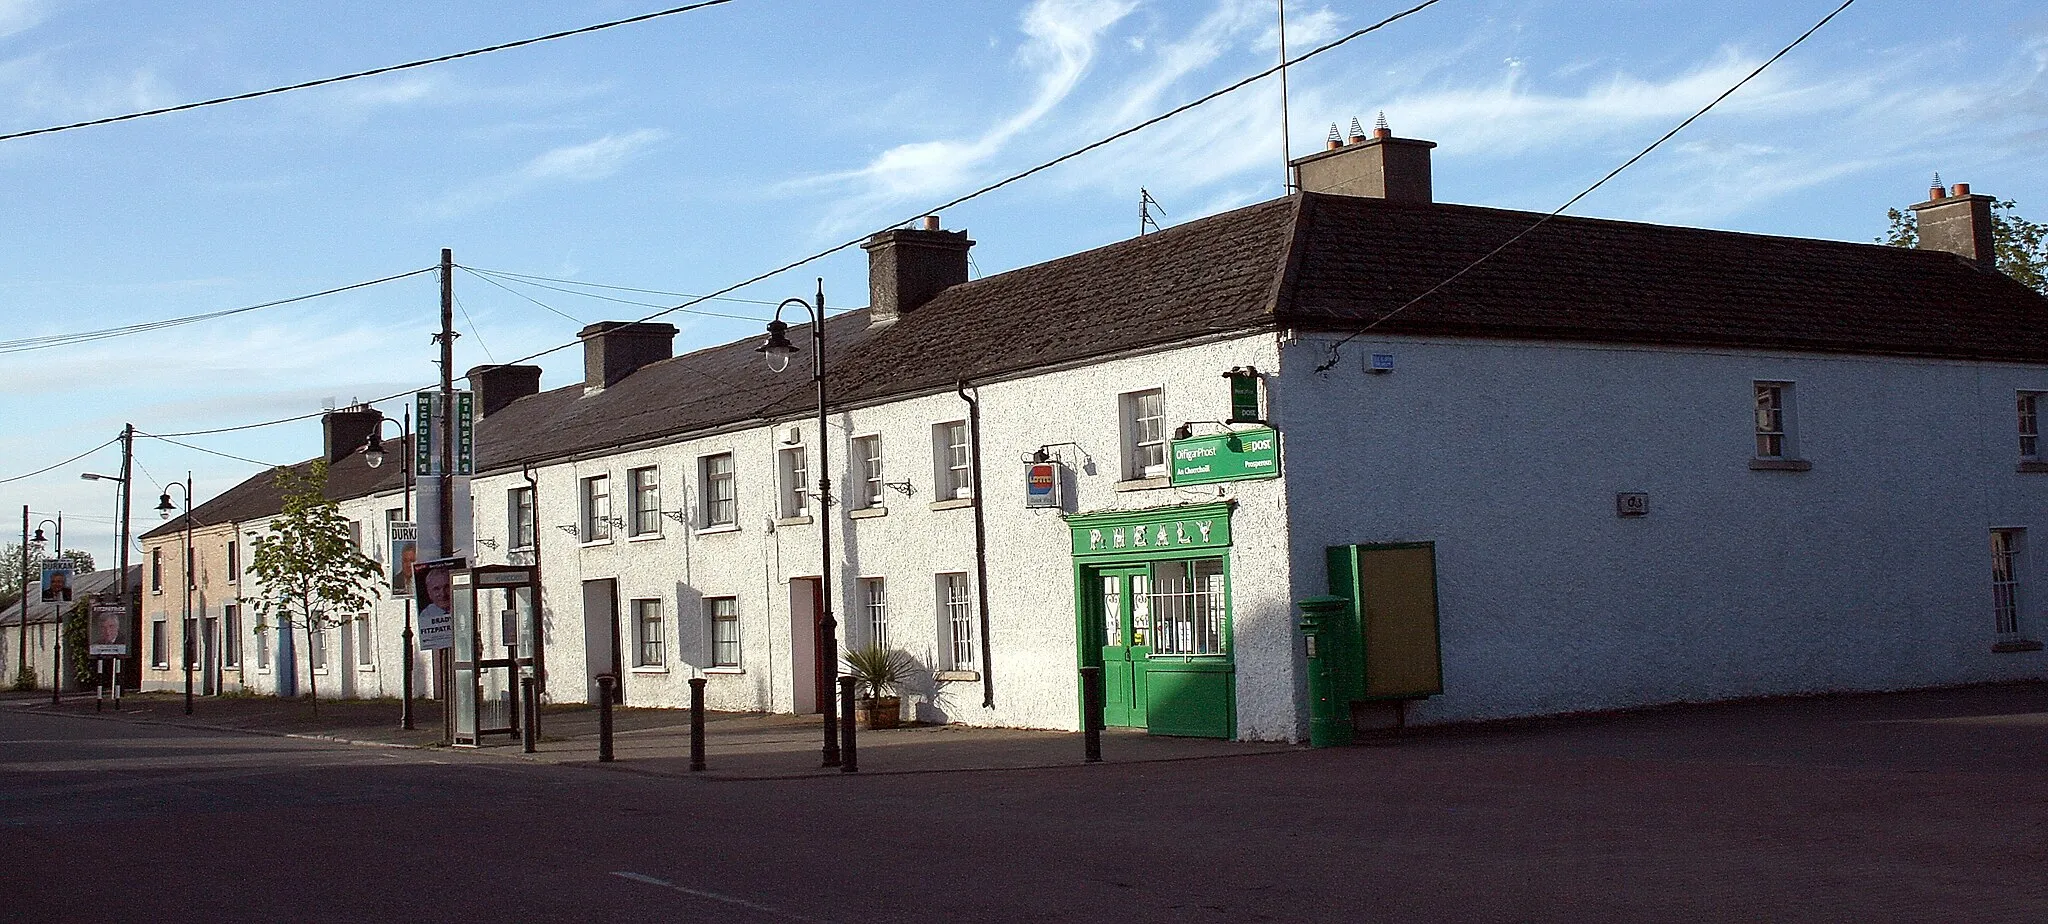 Photo showing: Prosperous, County Kildare, Ireland on the R408 in the older part of town.